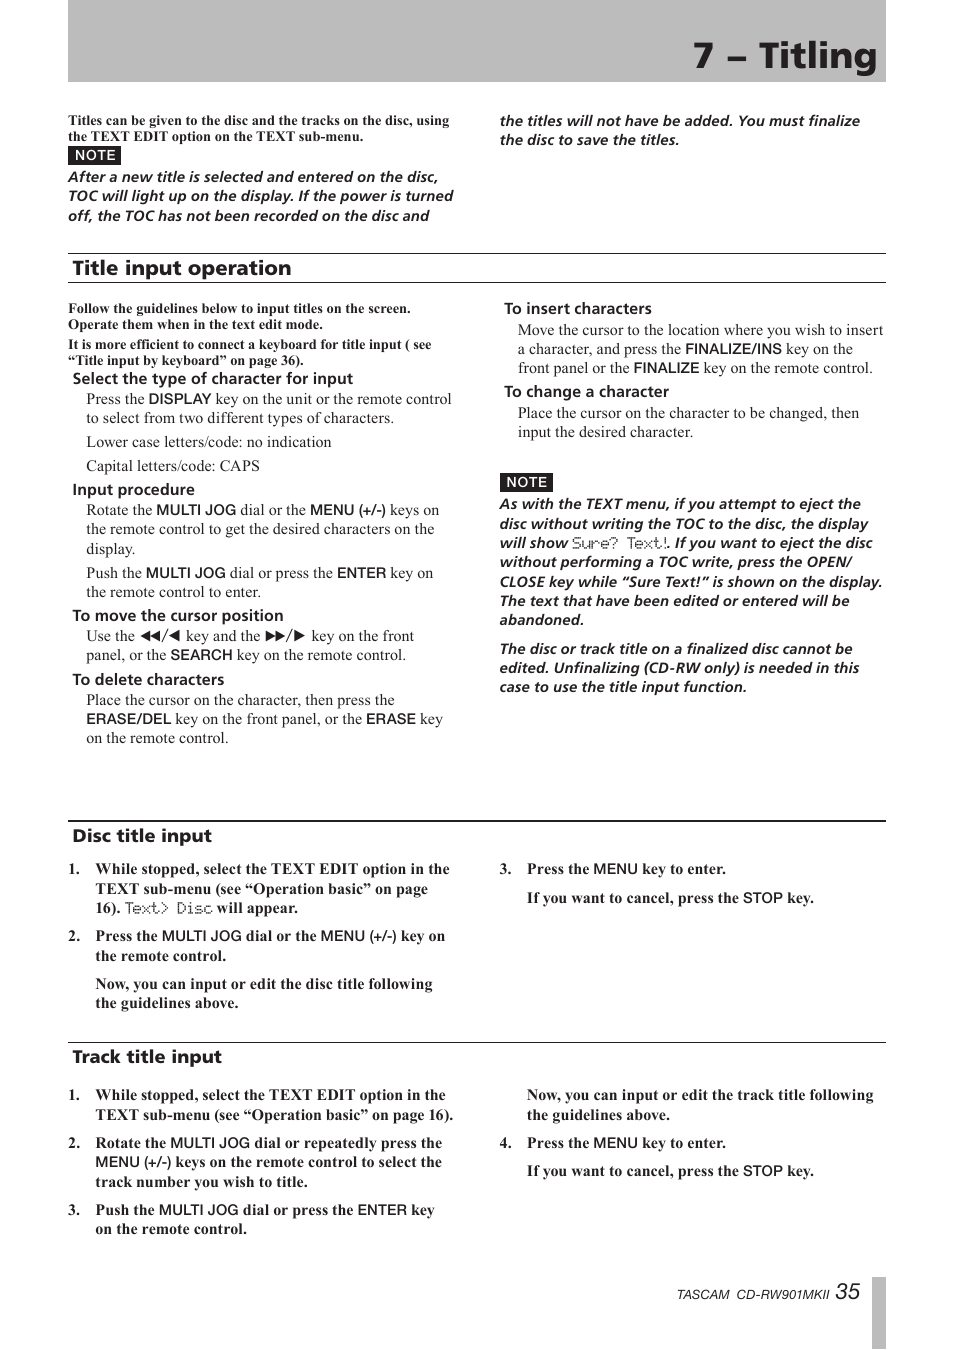 7 − titling, Title input operation, Disc title input | Track title input, Disc title input track title input, Important safety instructions | Teac CD-RW901MKII User Manual | Page 35 / 44